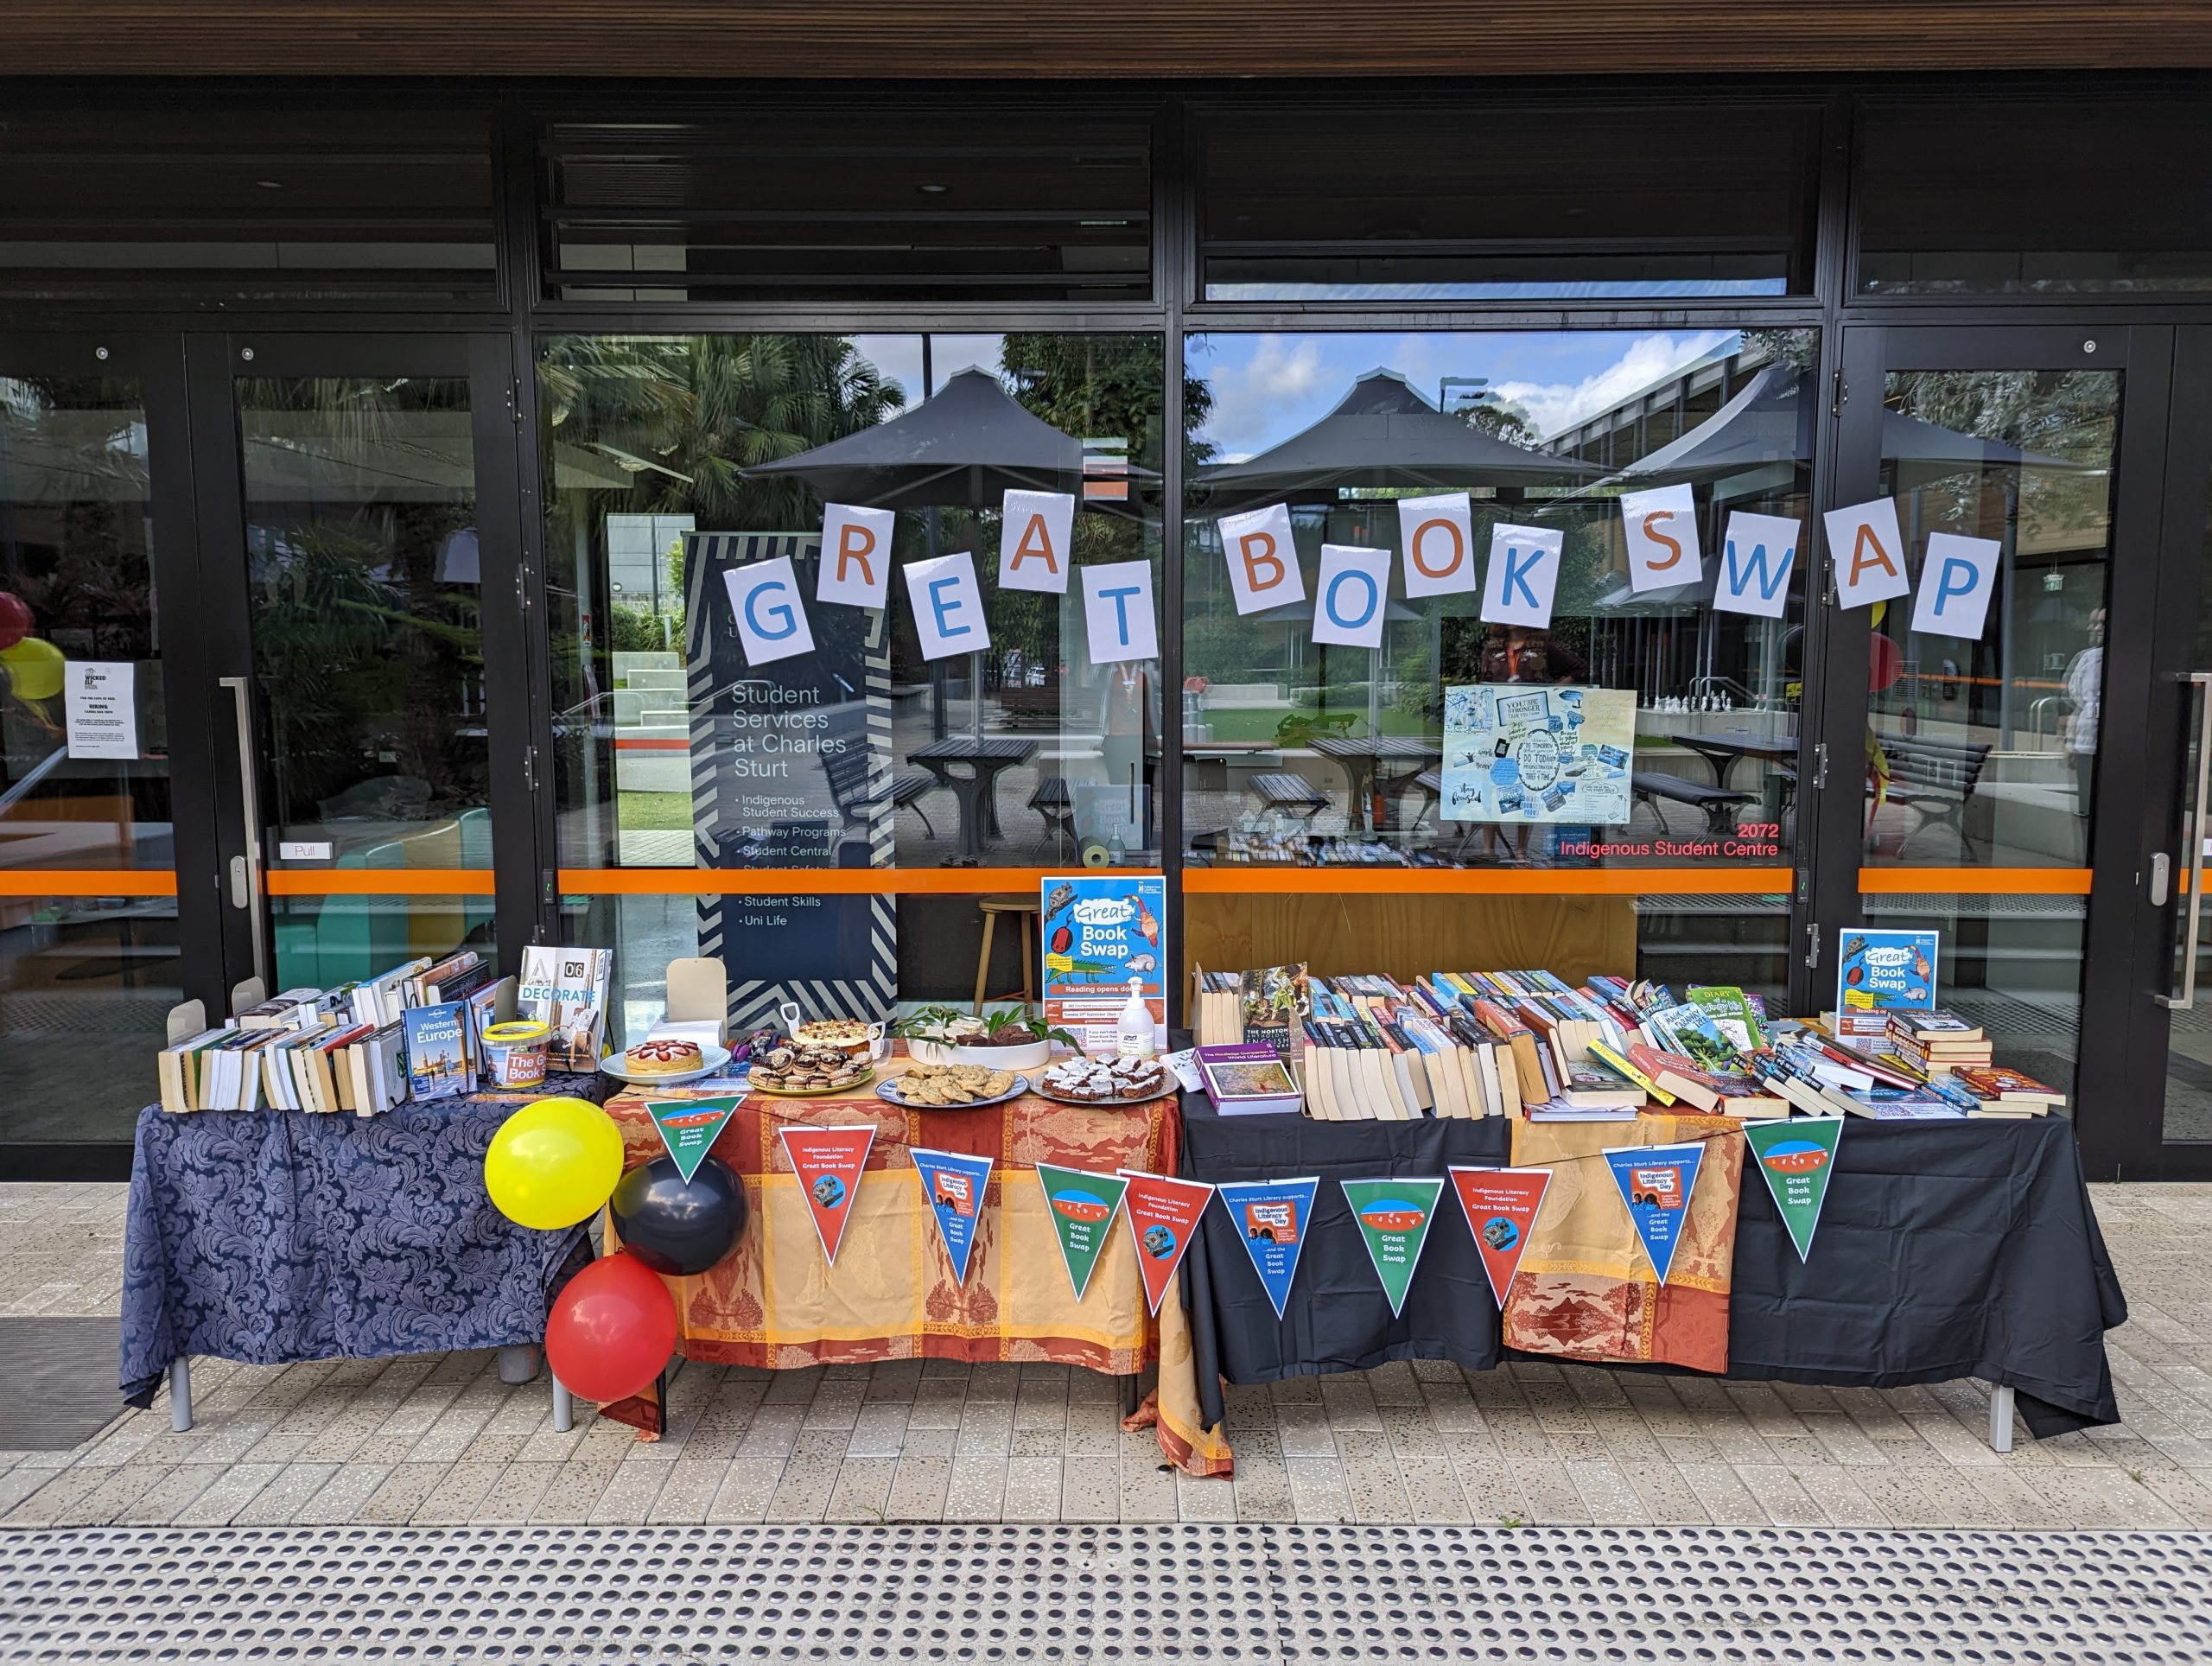 Cake and books stall at the Great Book Swap in Port Macquarie.